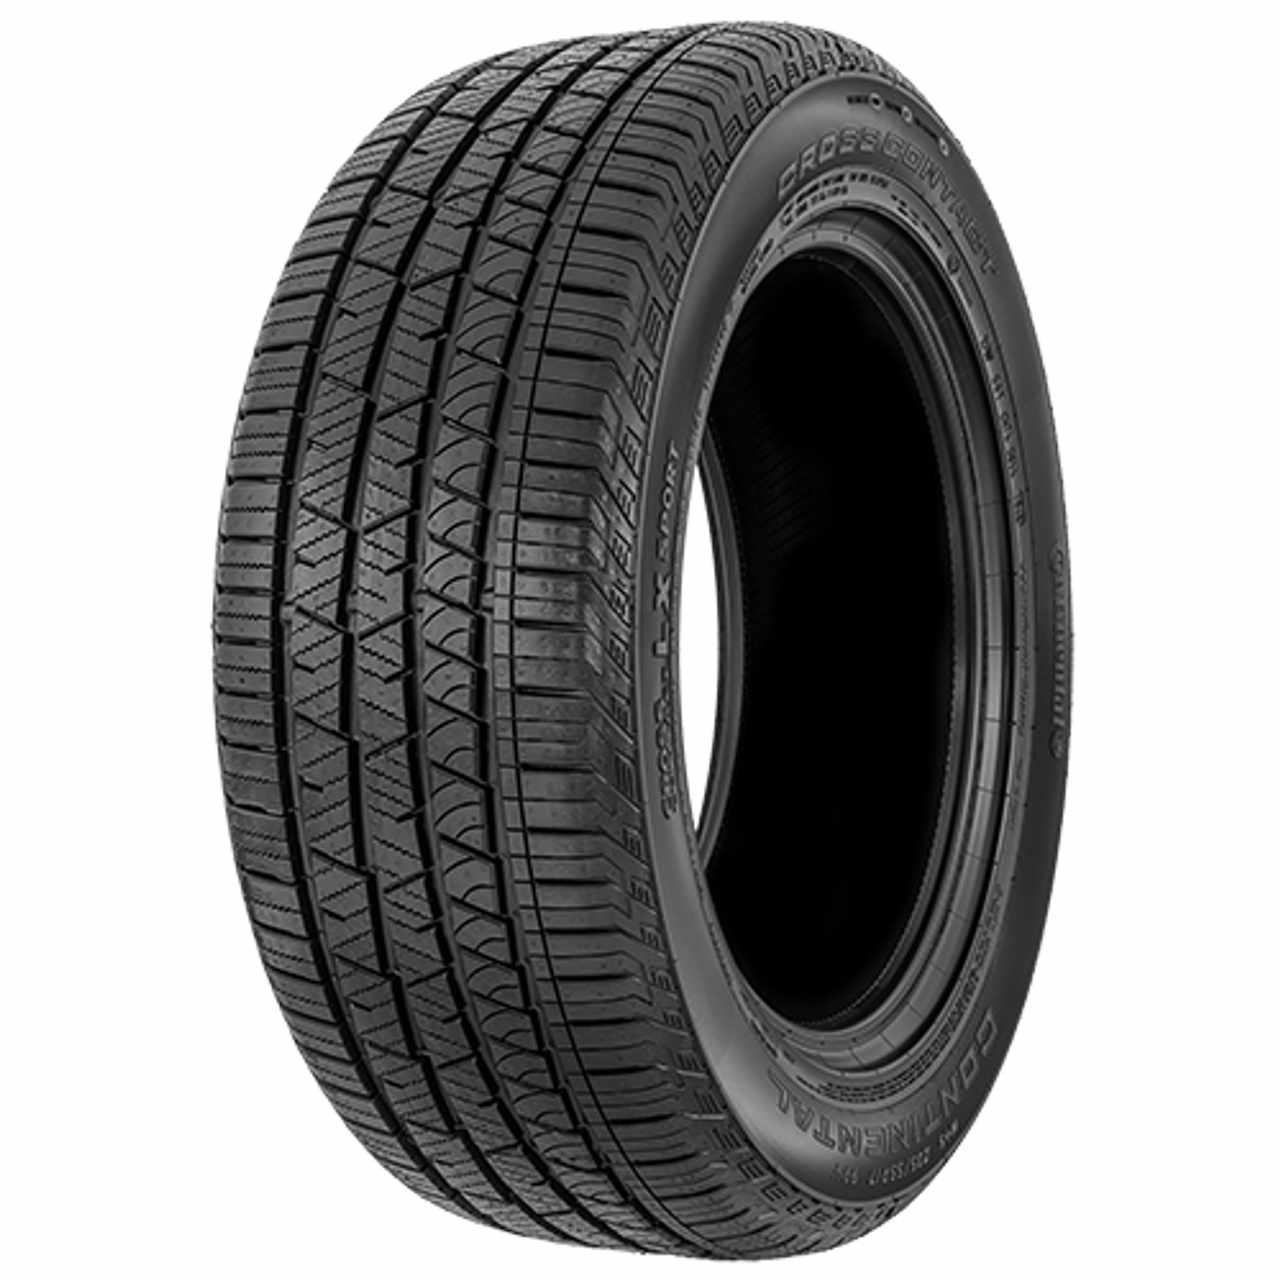 CONTINENTAL CROSSCONTACT LX SPORT (MO1) 315/40R21 115V FR BSW XL